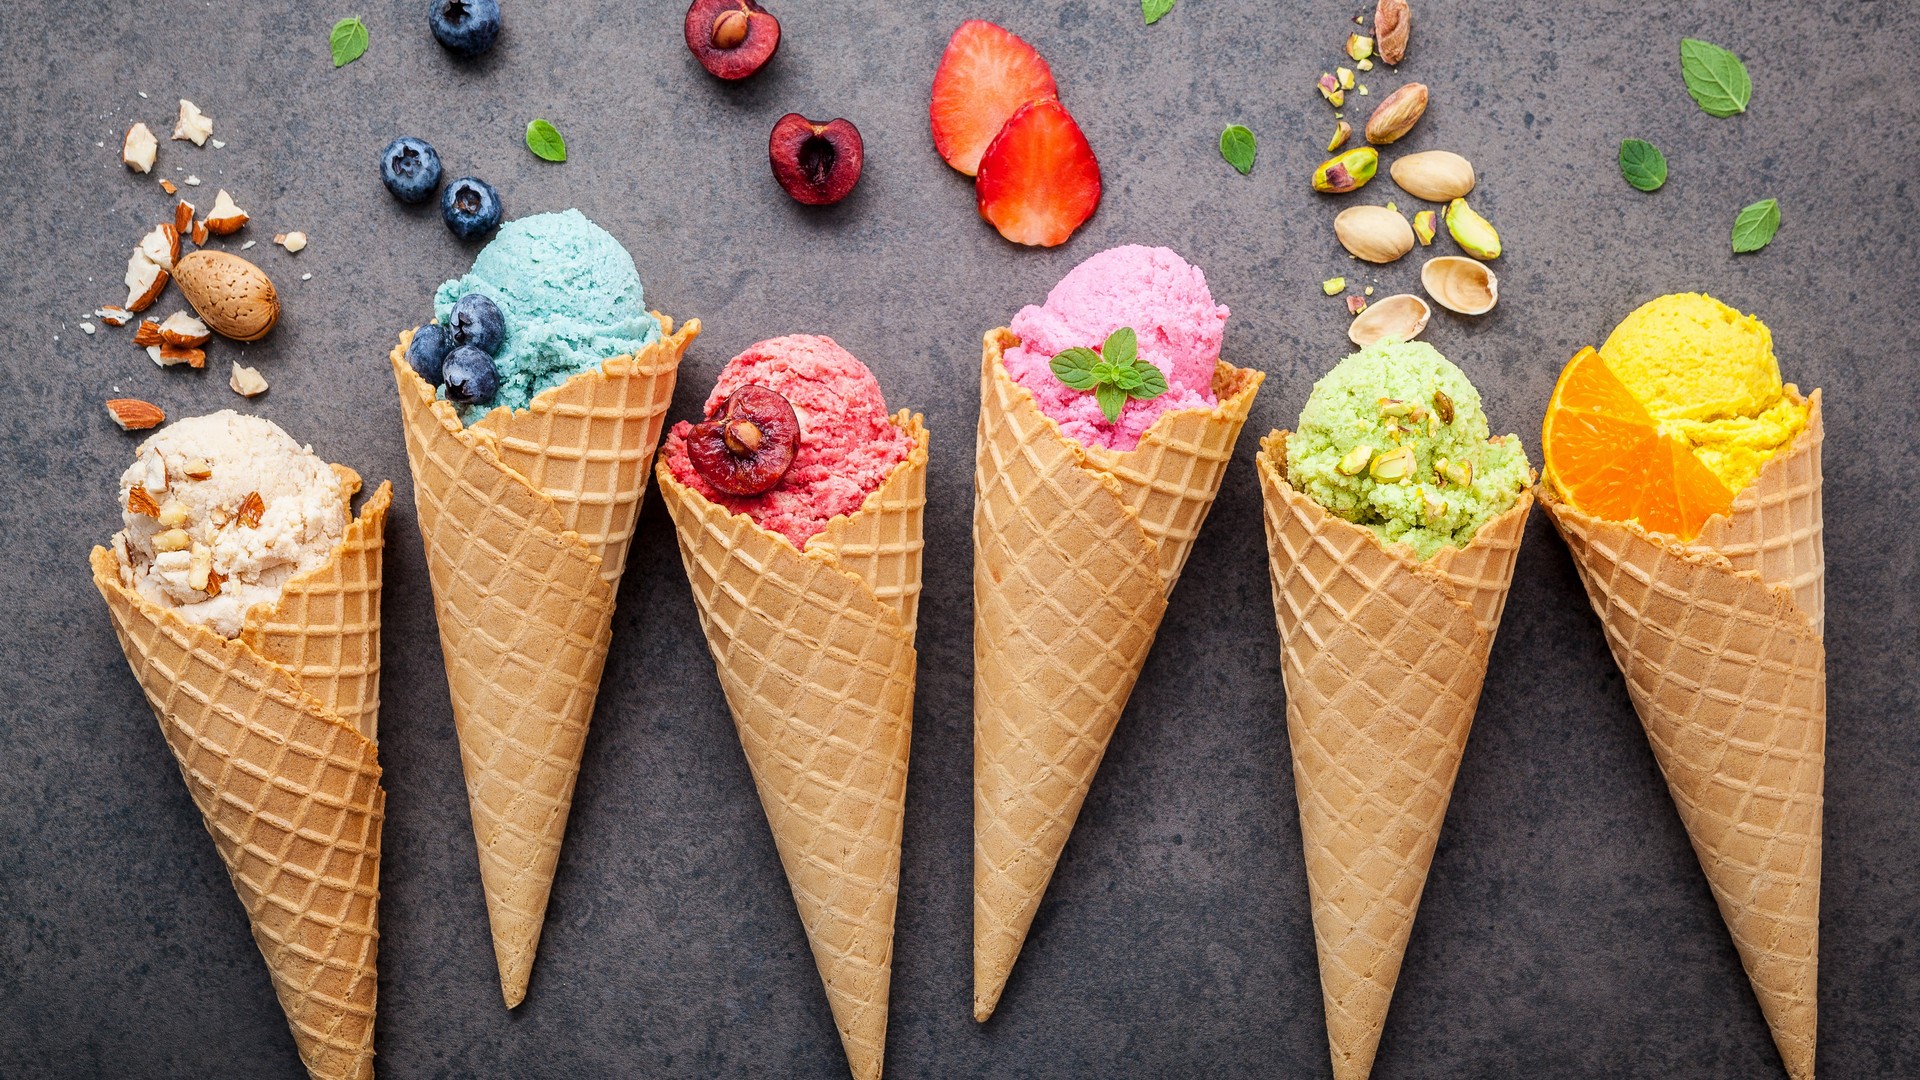 HD Ice Cream Cone Backgrounds with high-resolution 1920x1080 pixel. You can use this wallpaper for your Windows and Mac OS computers as well as your Android and iPhone smartphones